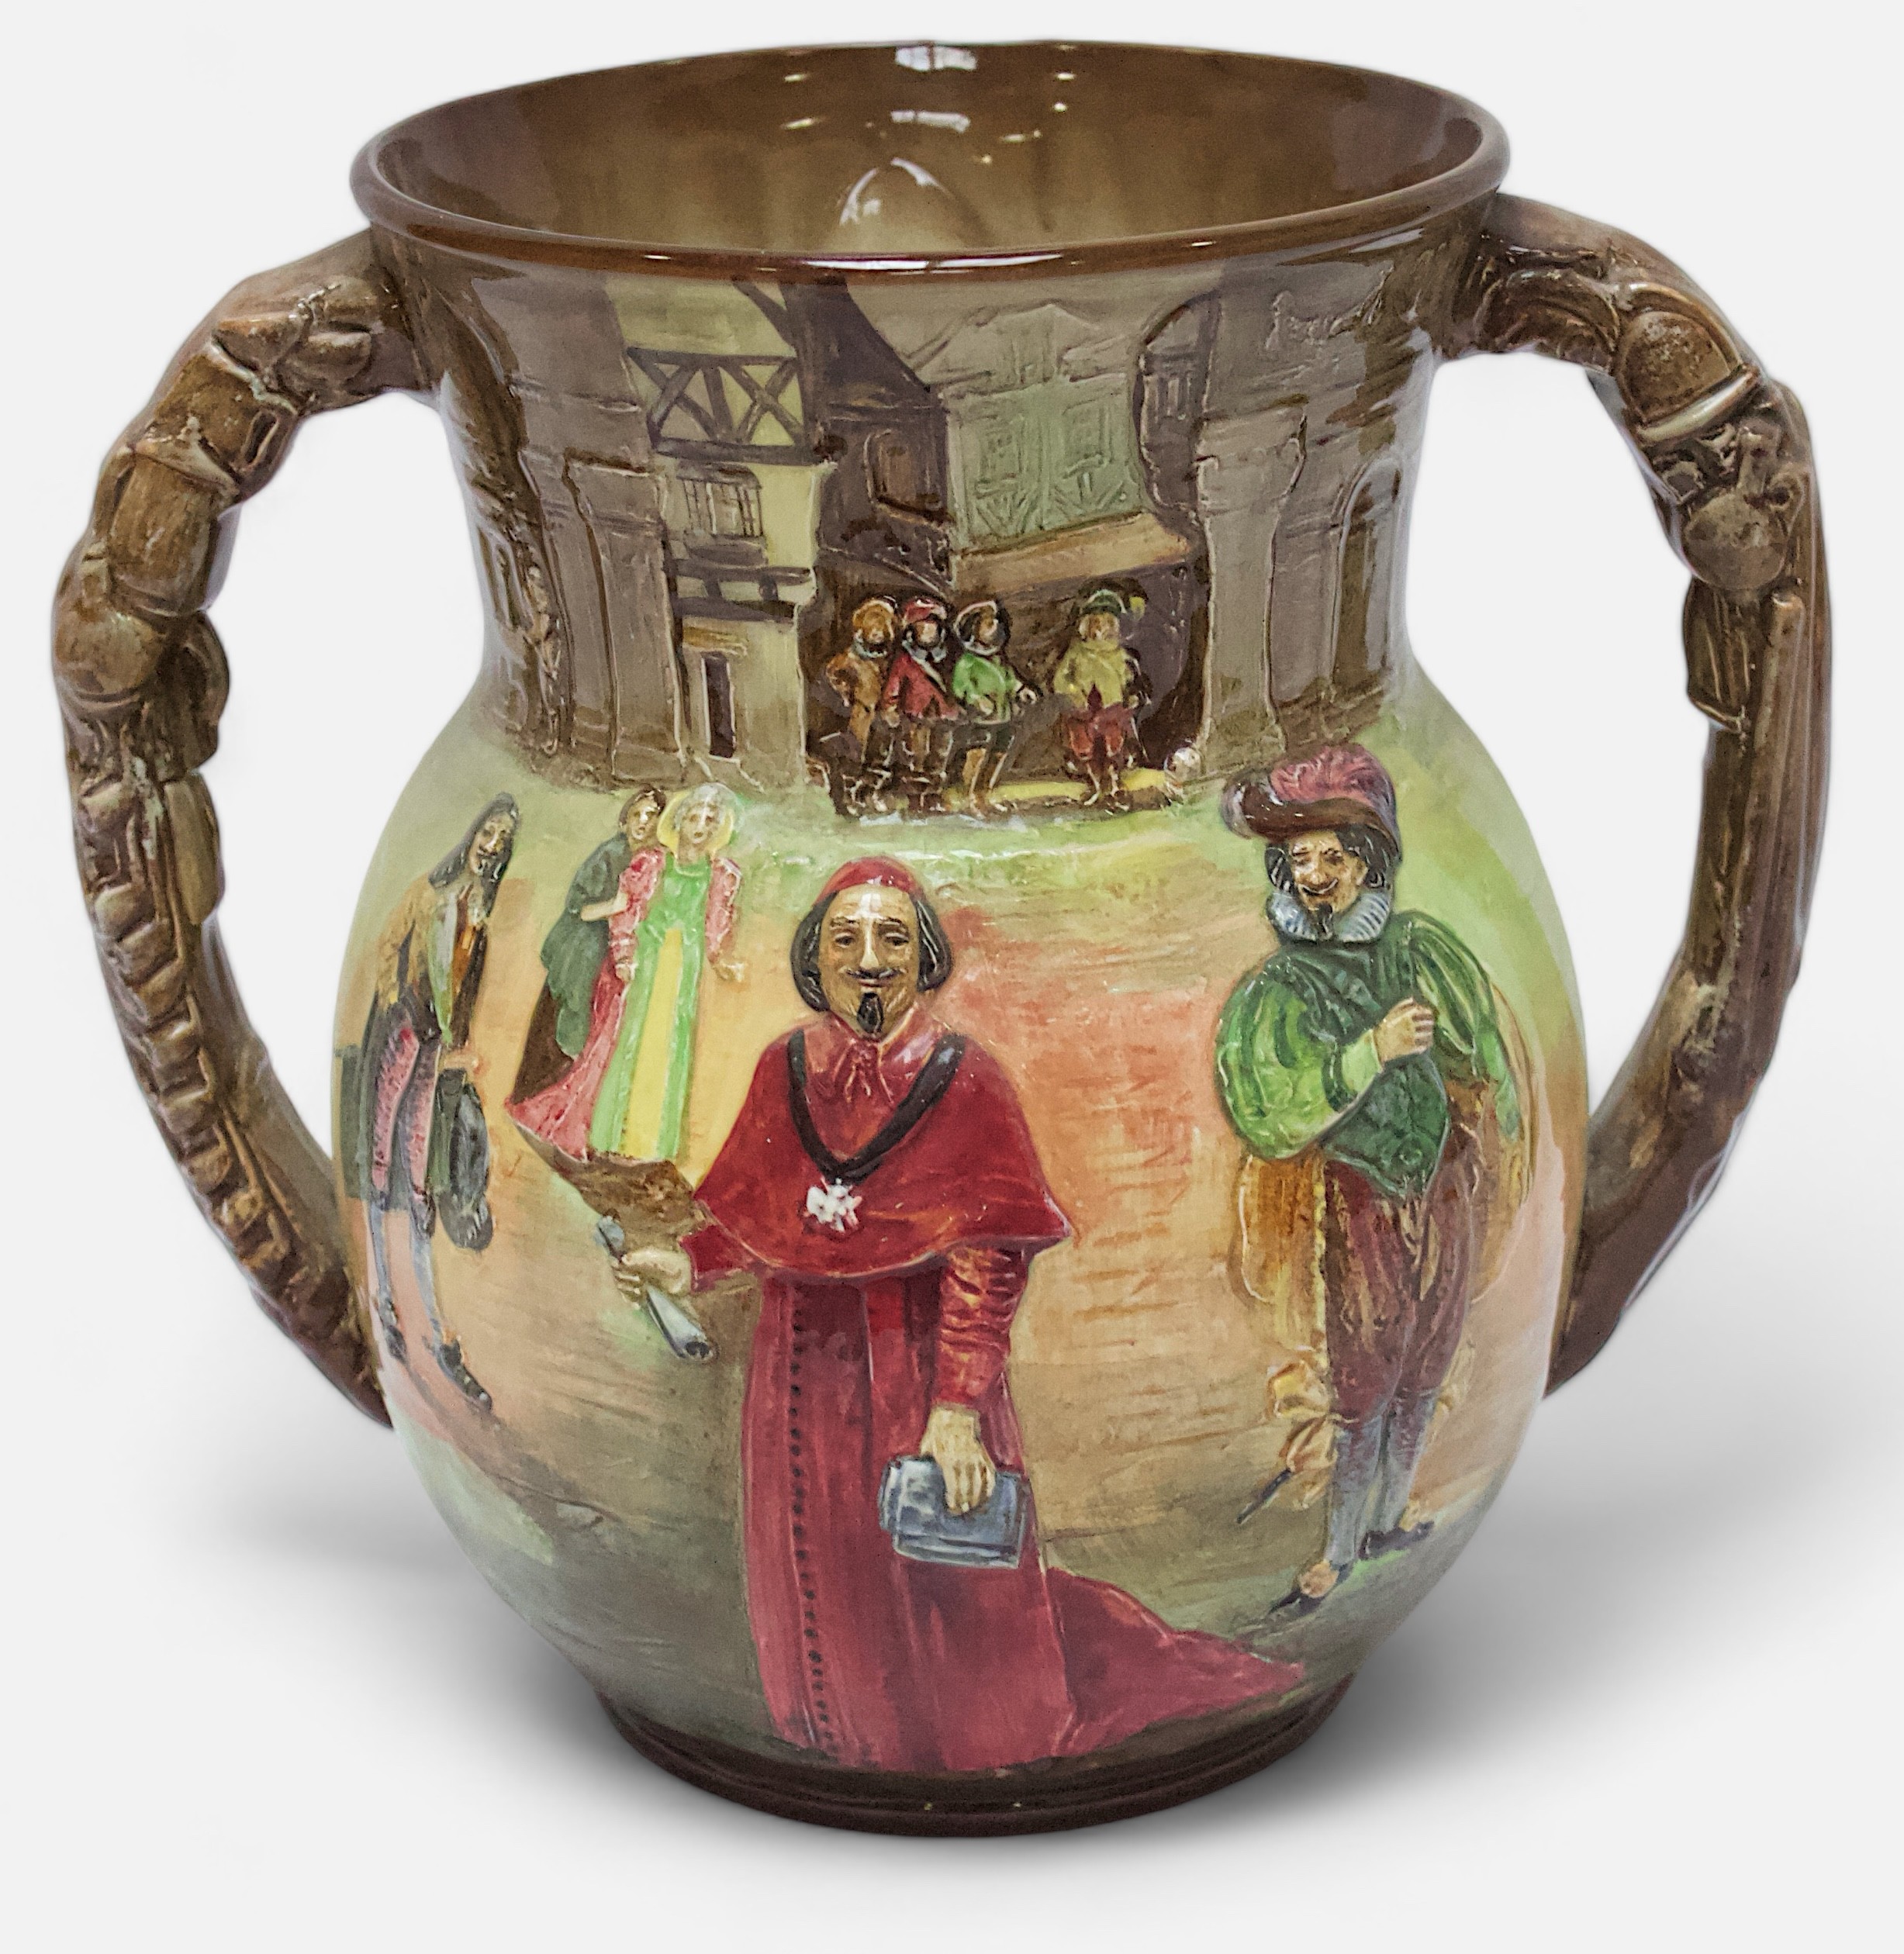 A Royal Doulton loving cup, ‘The Great Romance of Louis XIII Reign’ The Three Musketeers by Dumas, - Image 2 of 6